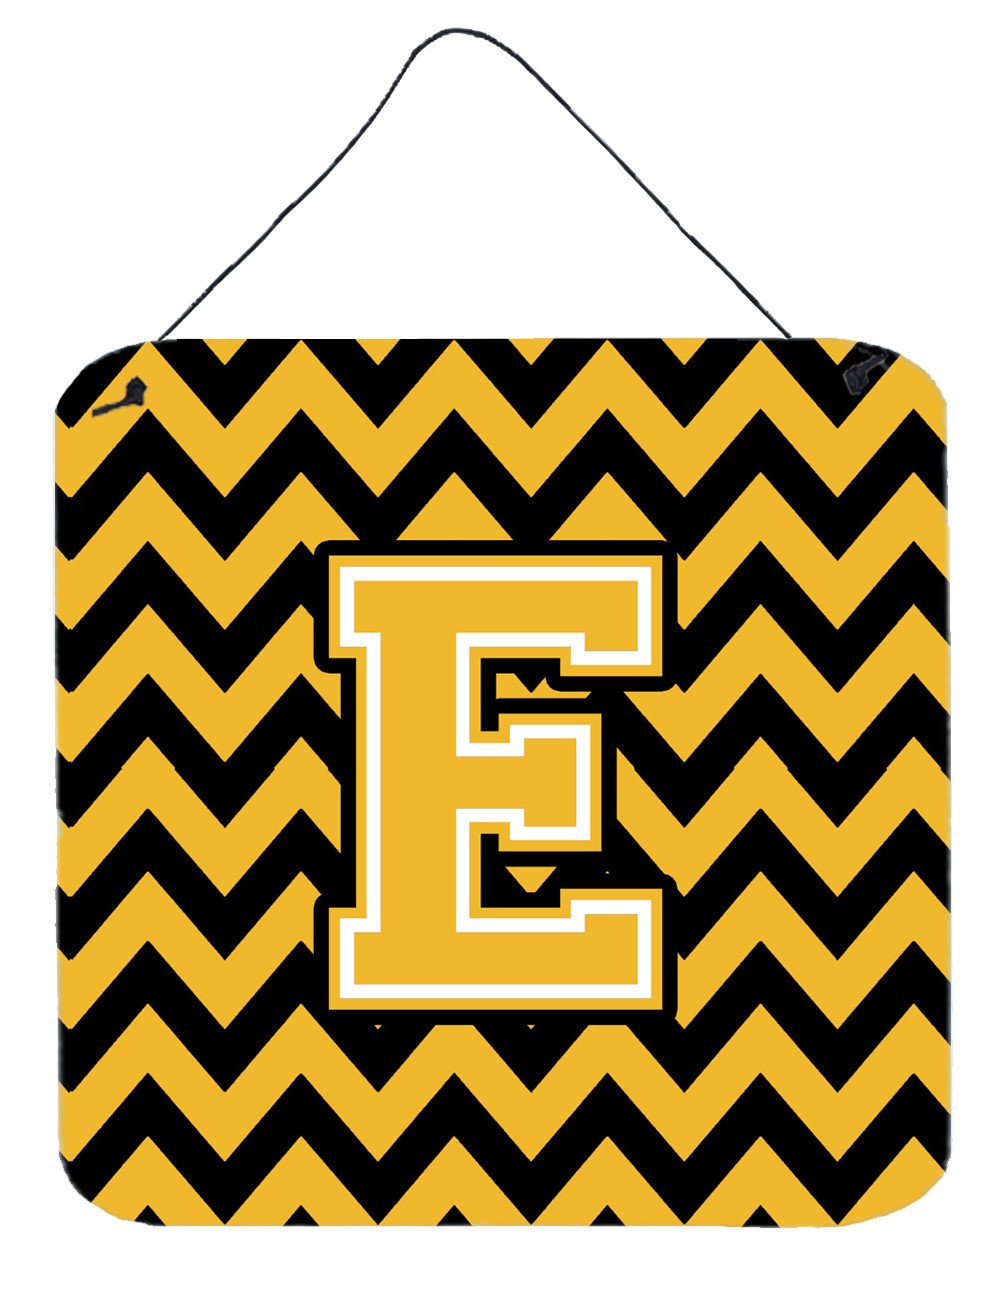 Letter E Chevron Black and Gold Wall or Door Hanging Prints CJ1053-EDS66 by Caroline's Treasures